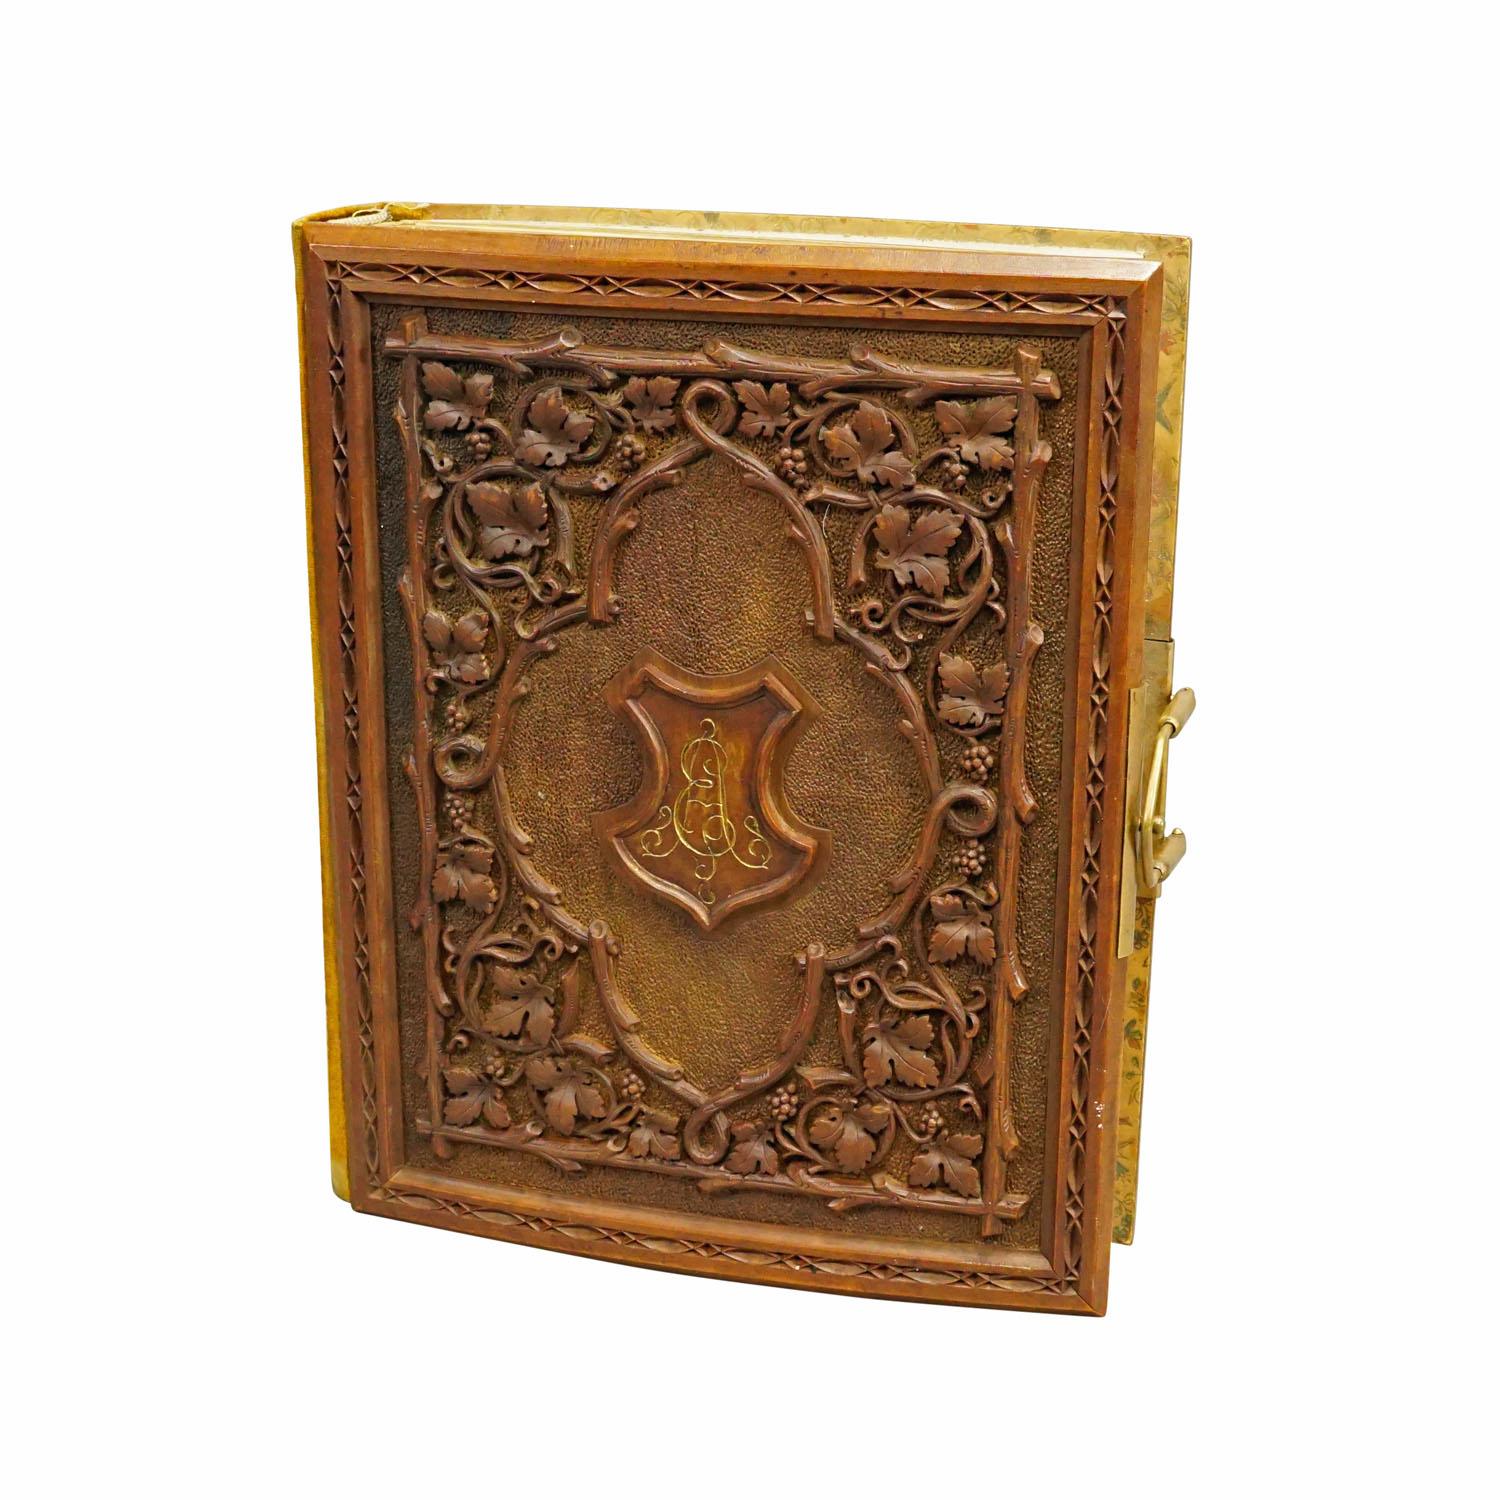 Antique Photo Album with Wooden Carved Cover, Brienz ca. 1900

A great antique photo album featuring a lindenwood carved cover depicting grapes, vines and a ligatured monogram. Handcarved in Brienz, Switzerland around 1900. Inside with spaces for